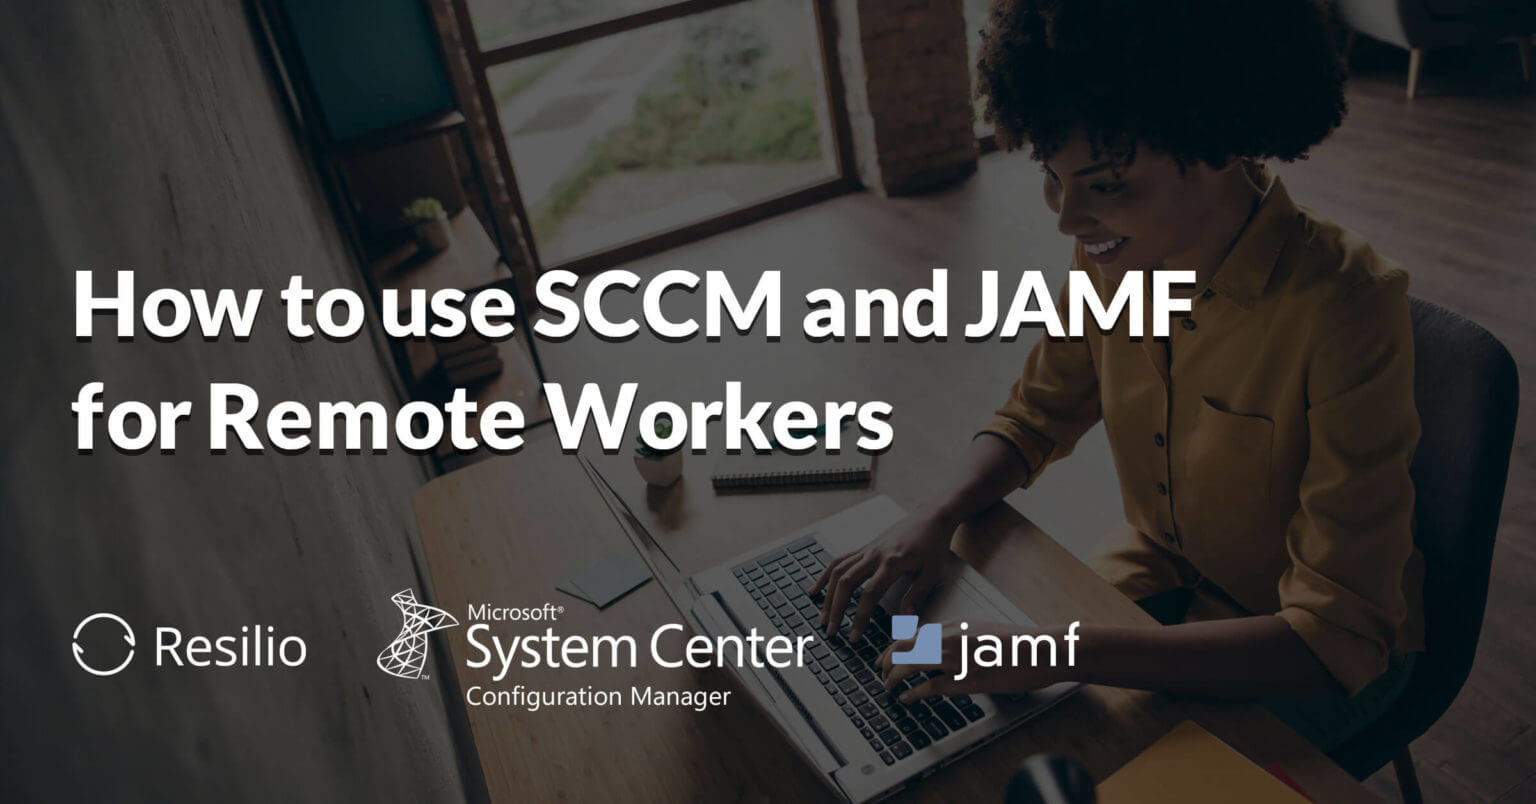 How to use Resilio Connect, SCCM and JAMF for Remote Workers